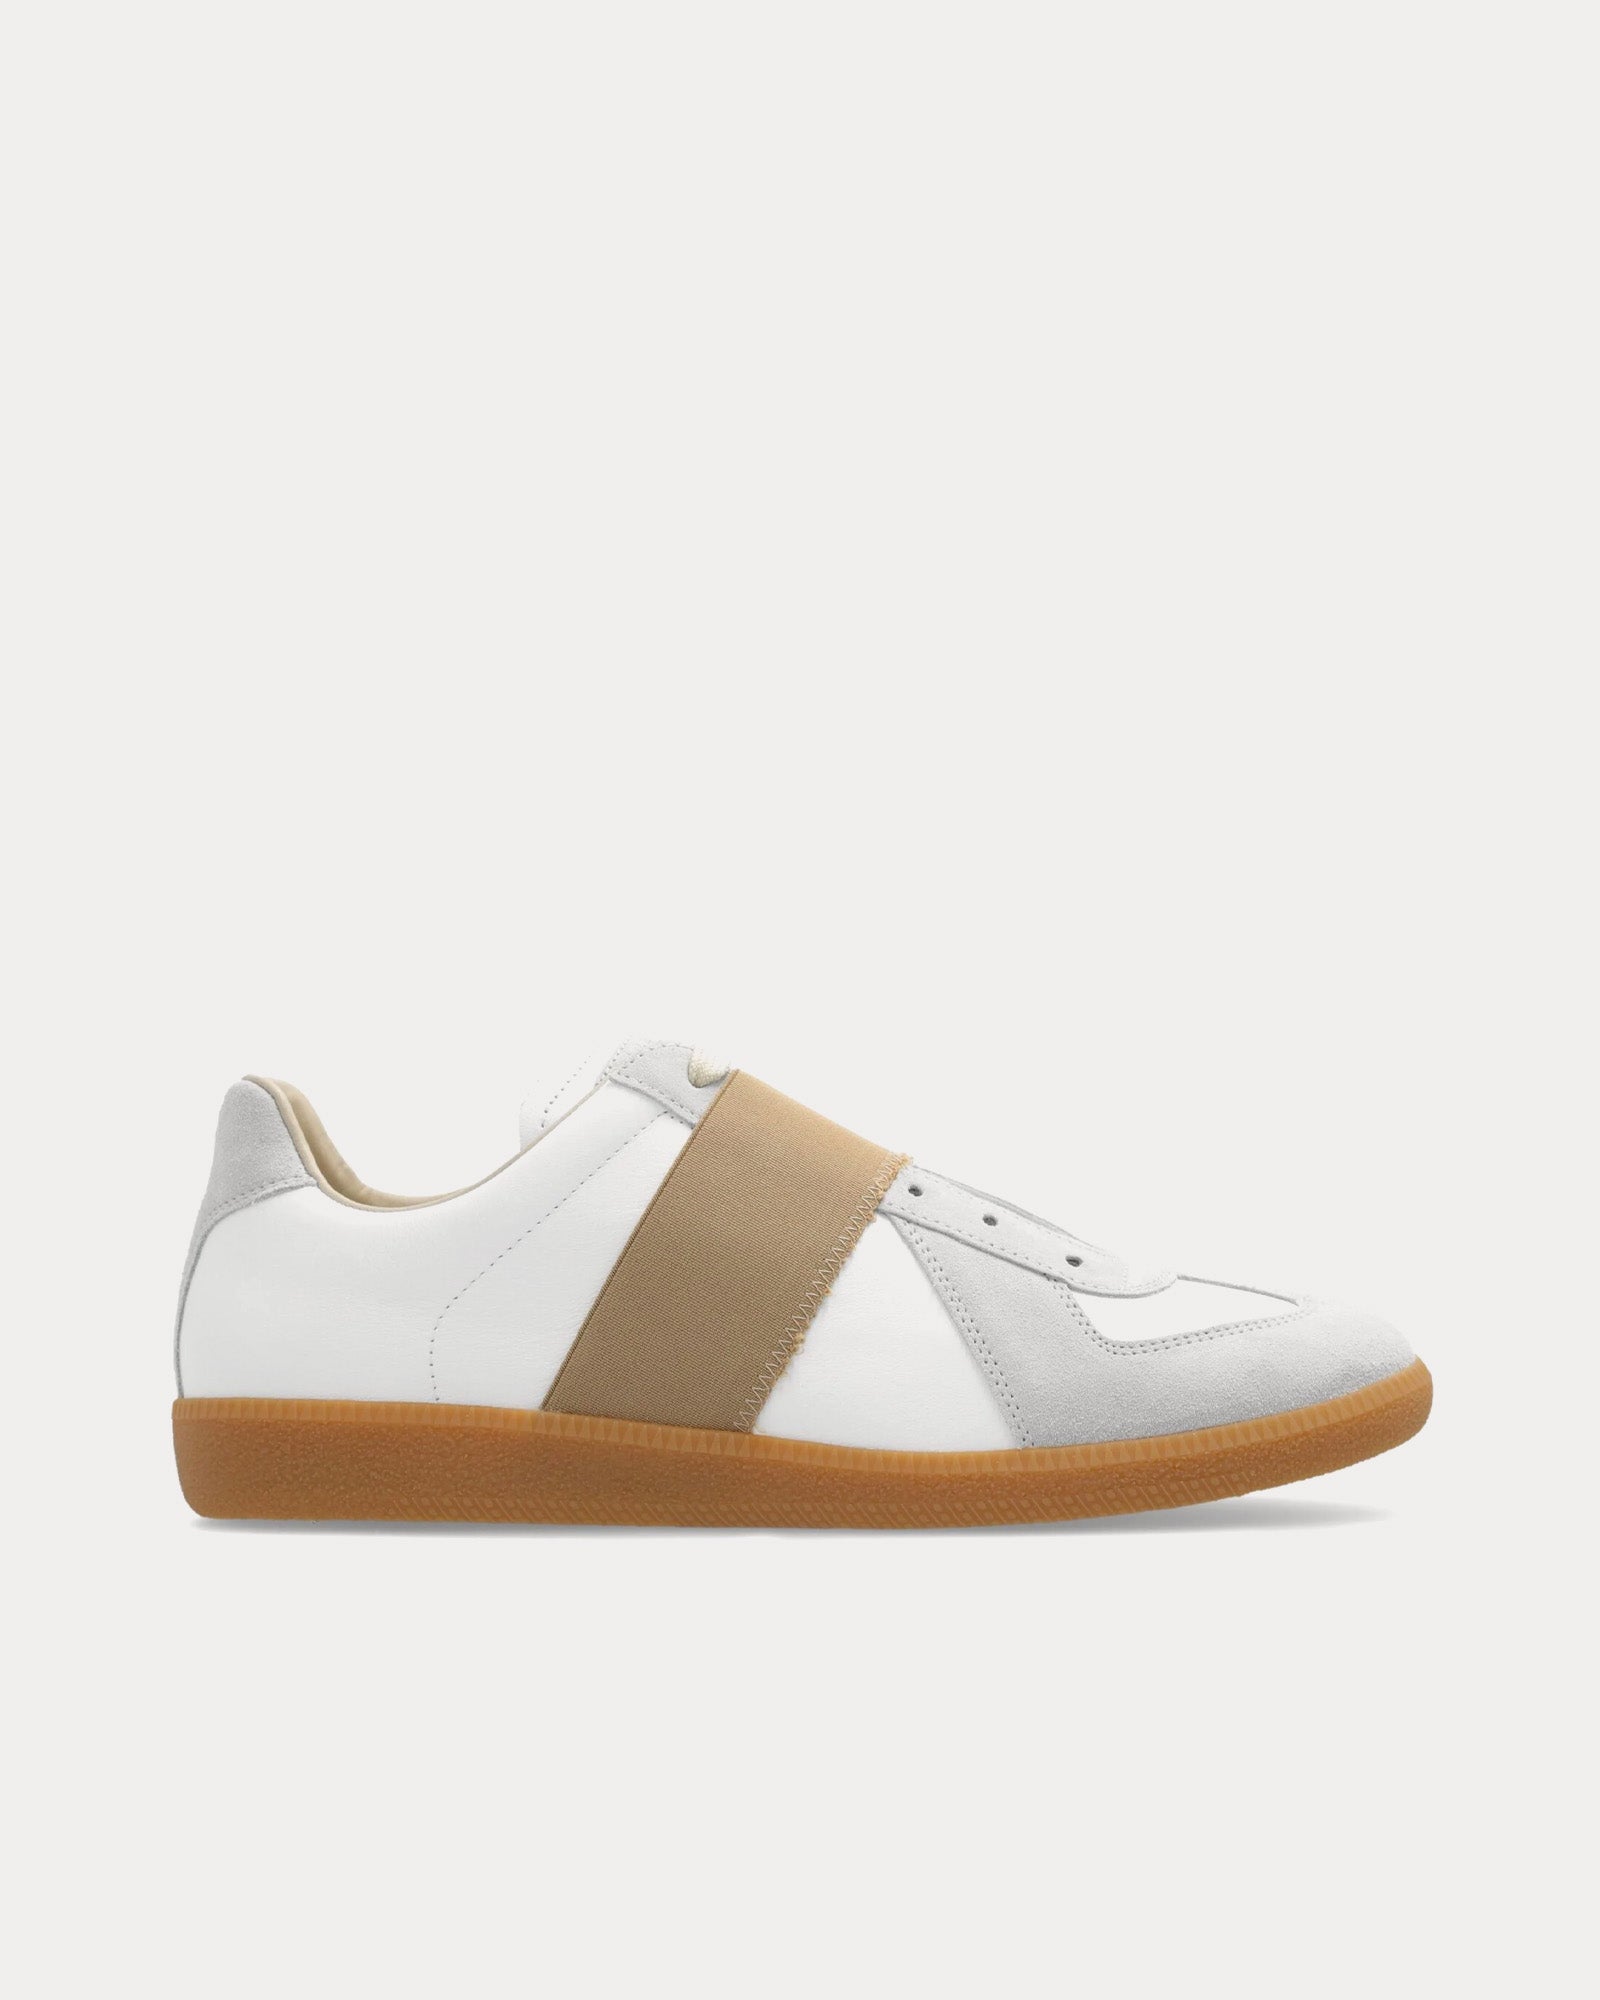 Maison Margiela - Replica Elasticated Band White / Light Grey / Beige Low Top Sneakers